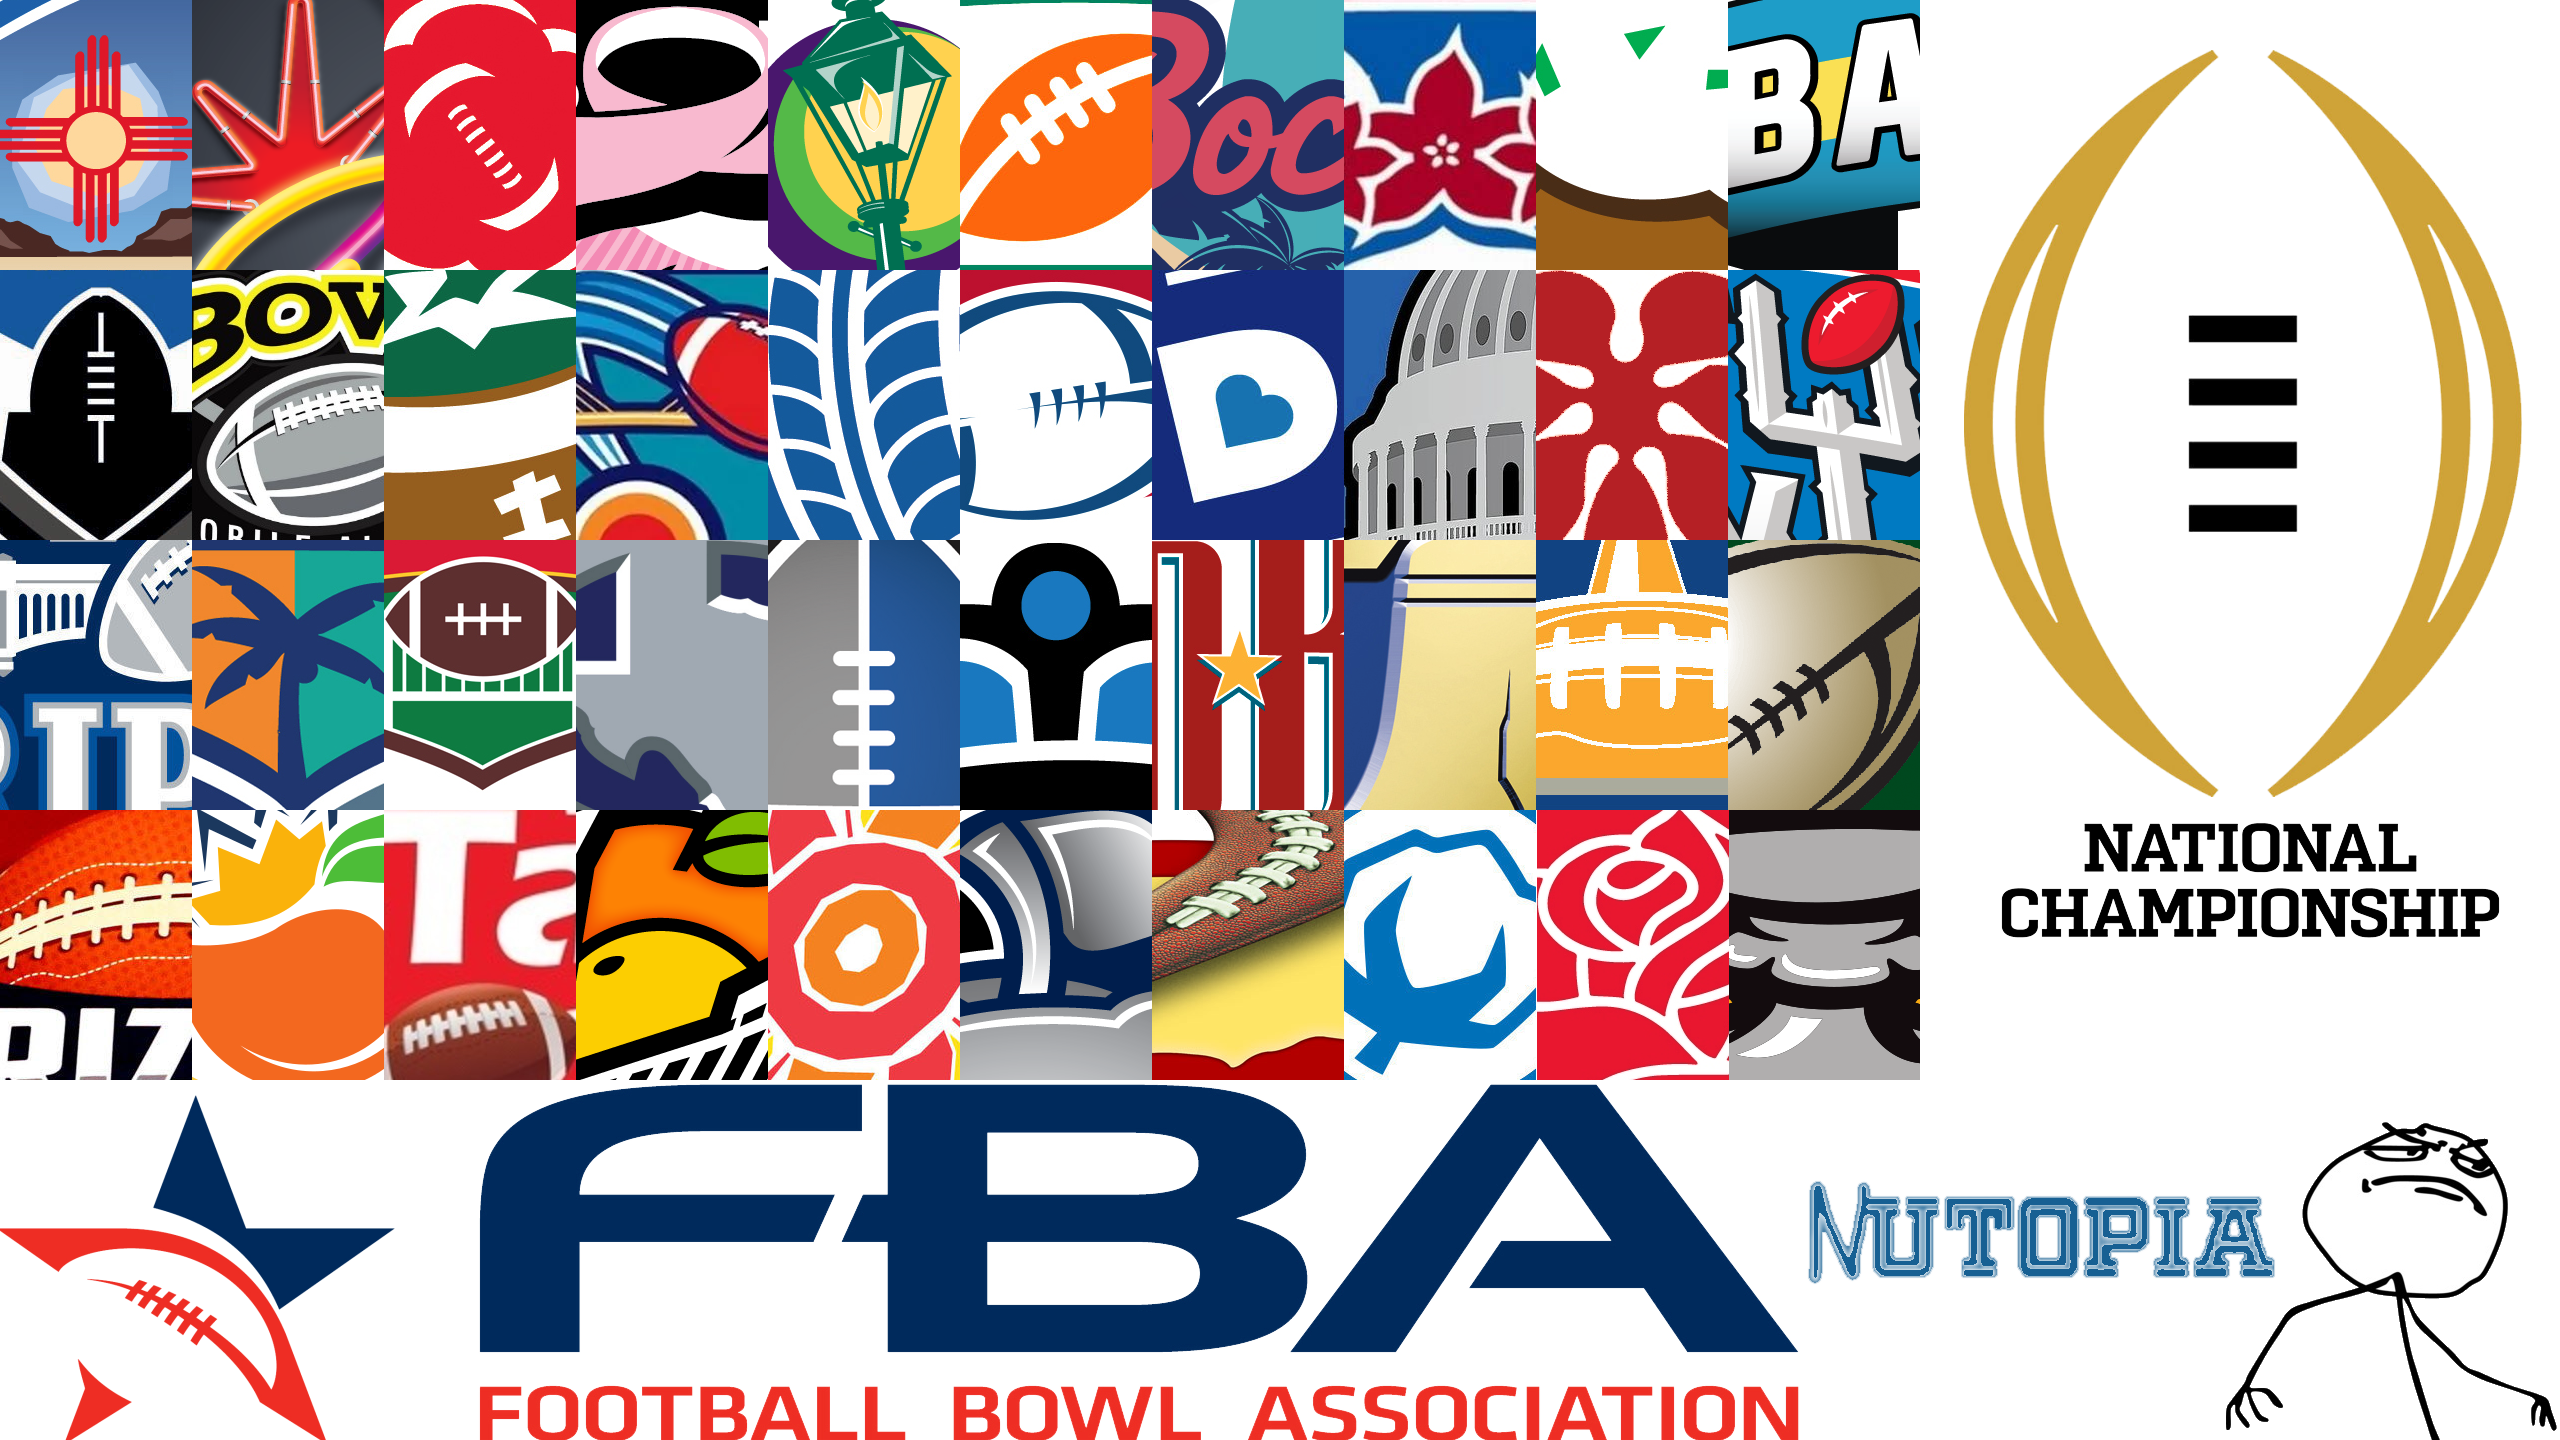 About The Football Bowl Association